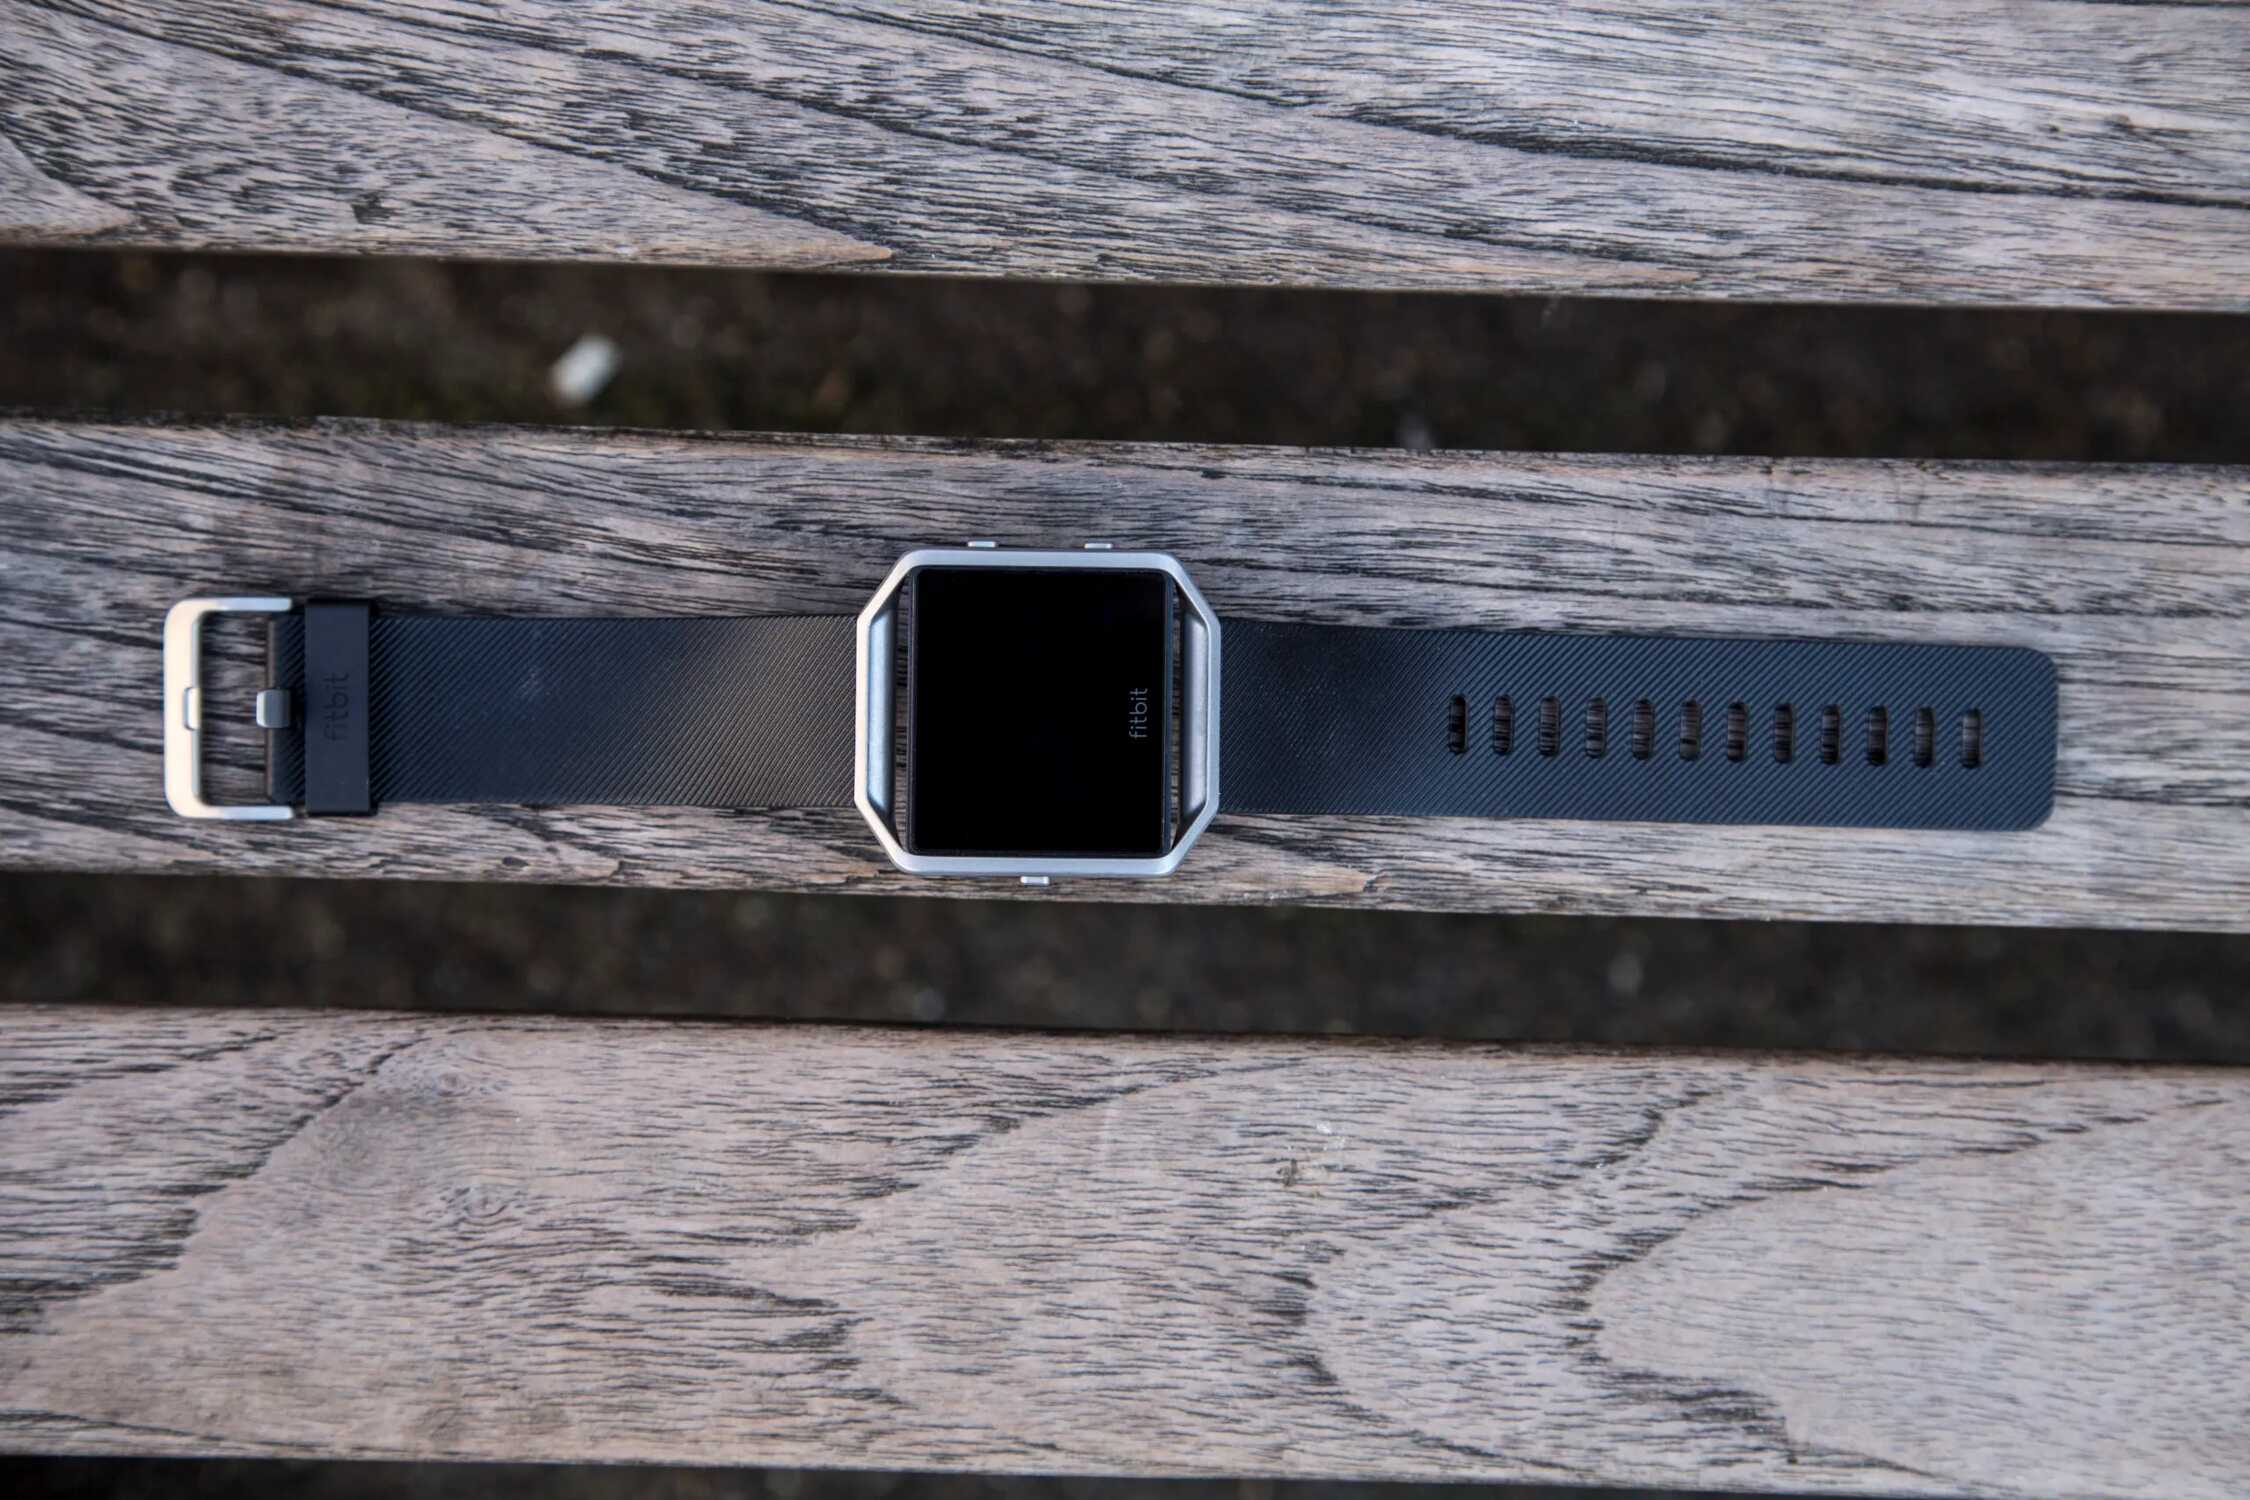 Musical Mastery: Controlling Music On Fitbit Blaze